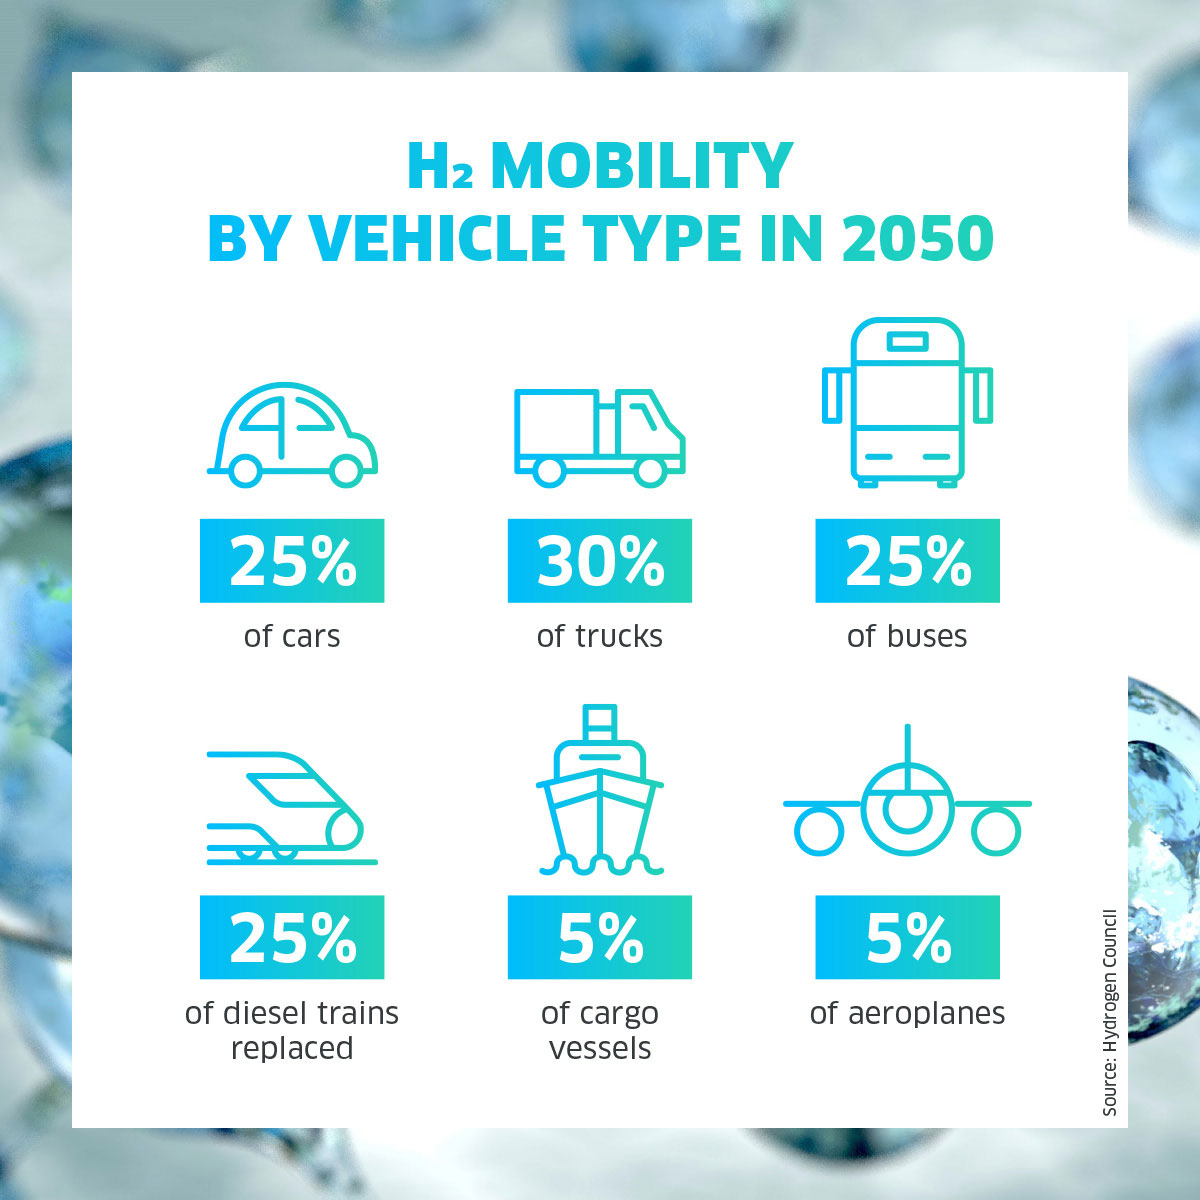 H2 mobility